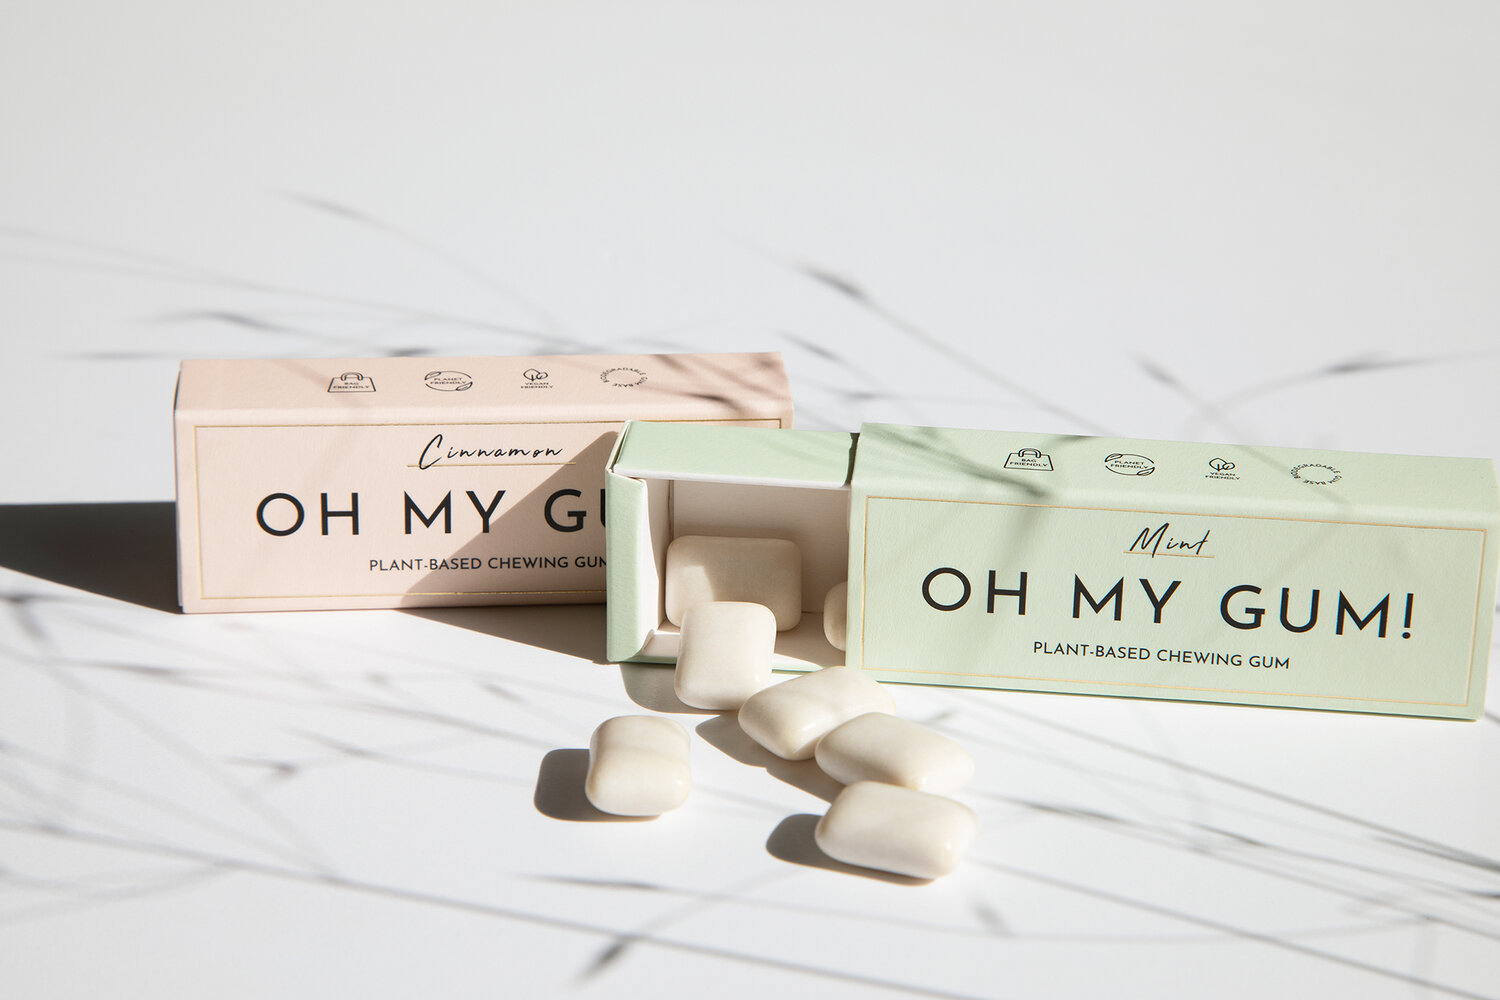 OH MY GUM! in natural mint and cinnamon made with chicle